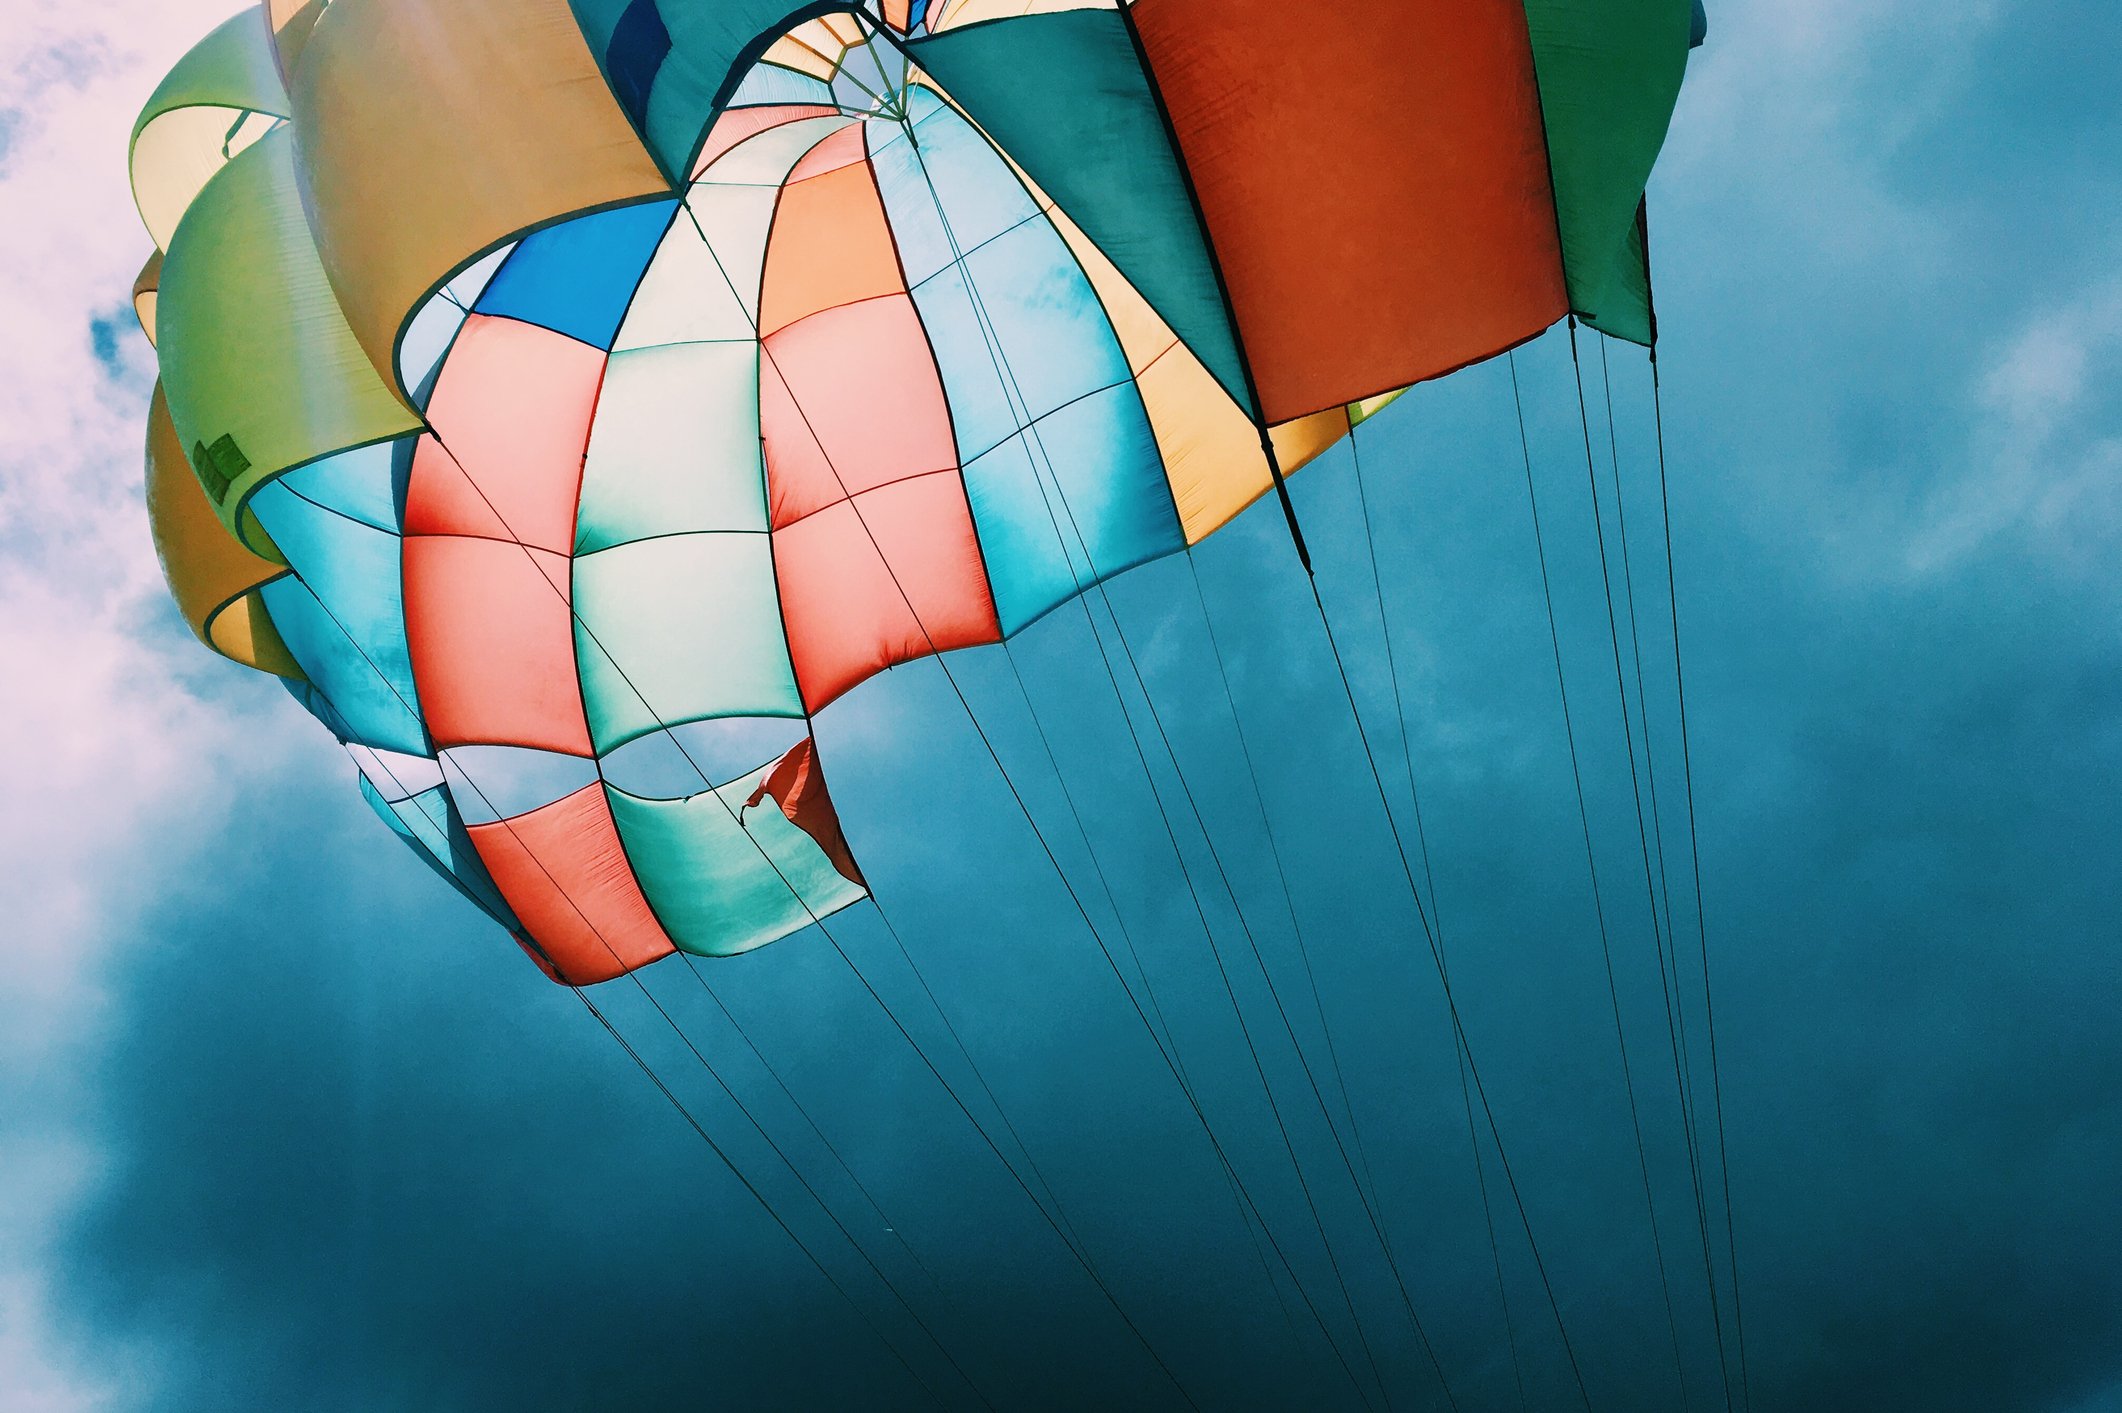 Photo of a parachutes opened with a dark blue sky in the background